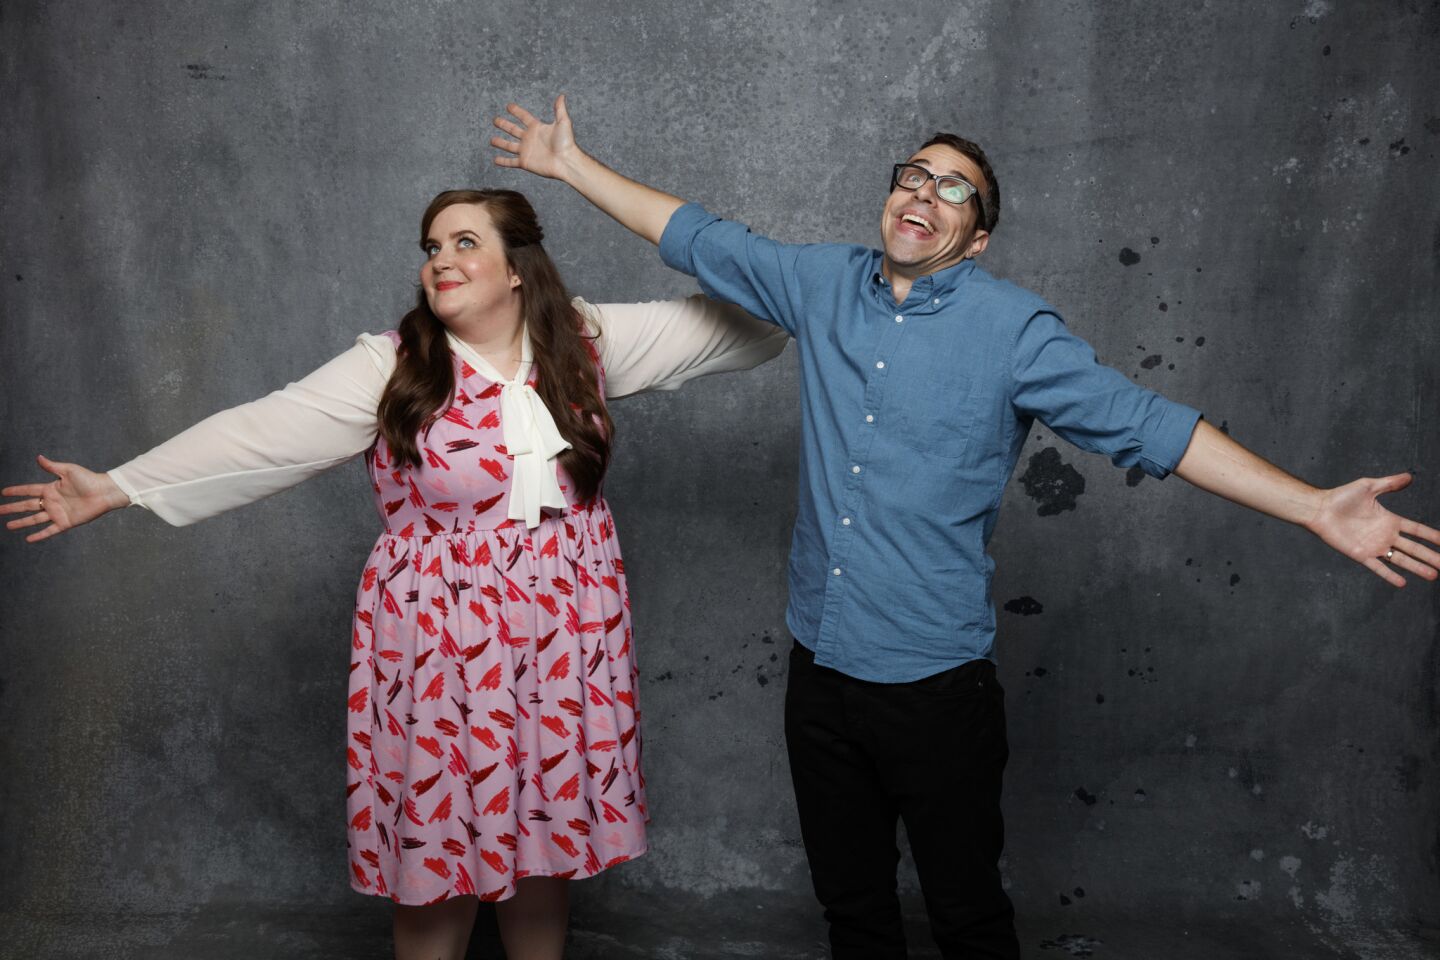 Aidy Bryant and Eric Knobel from the animated television series "Danger & Eggs."